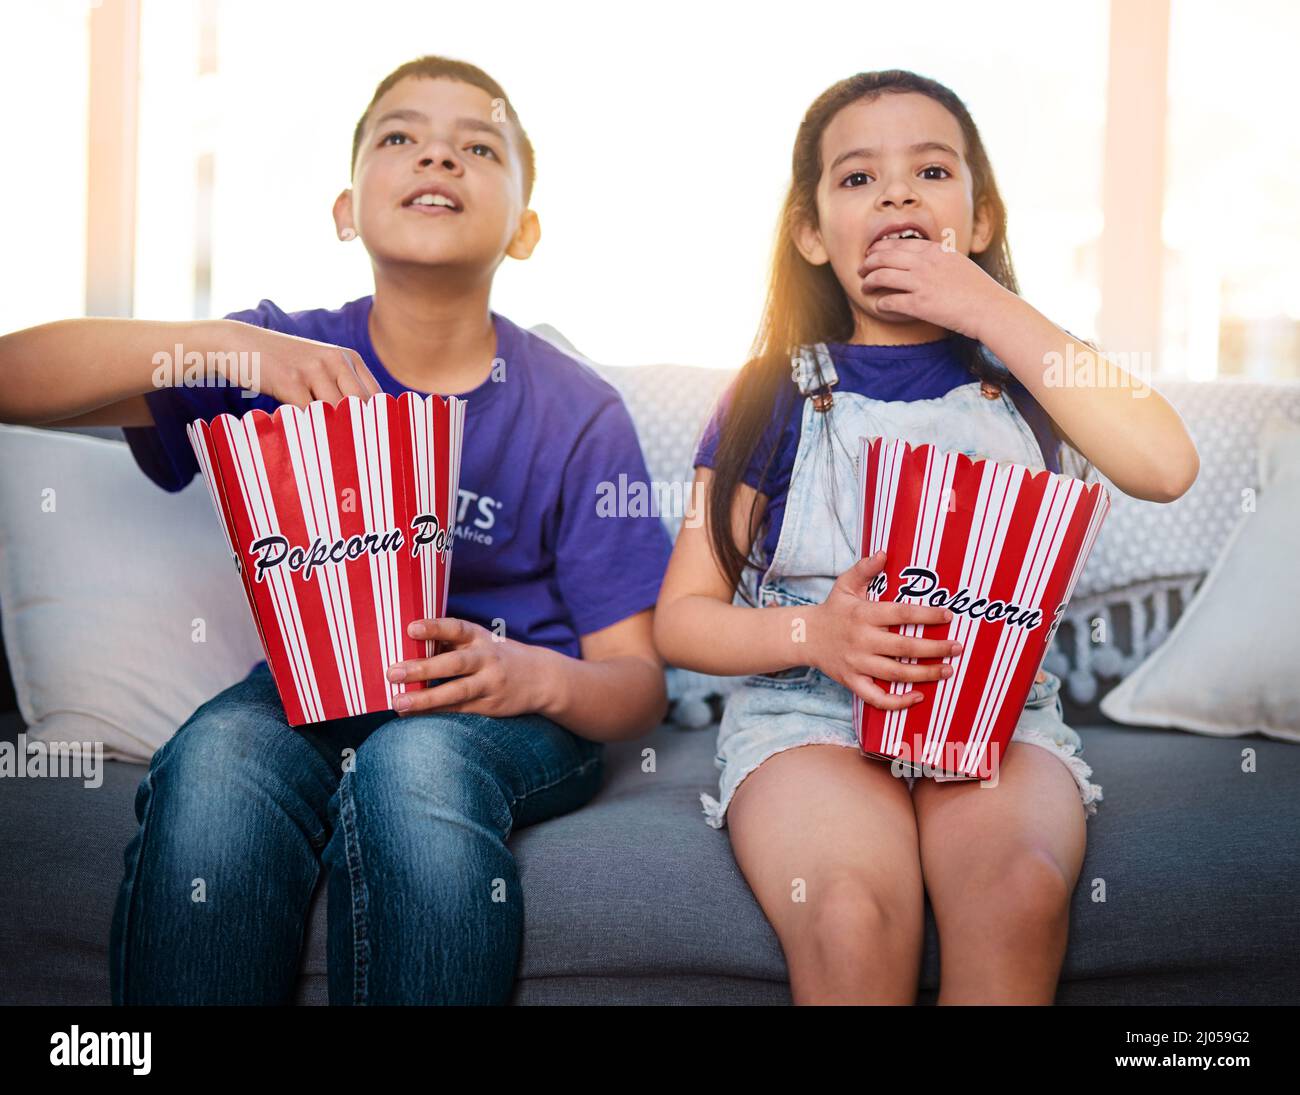 Movie days are always the best. Shot of two young children sitting on a sofa and eating popcorn while watching movies at home. Stock Photo